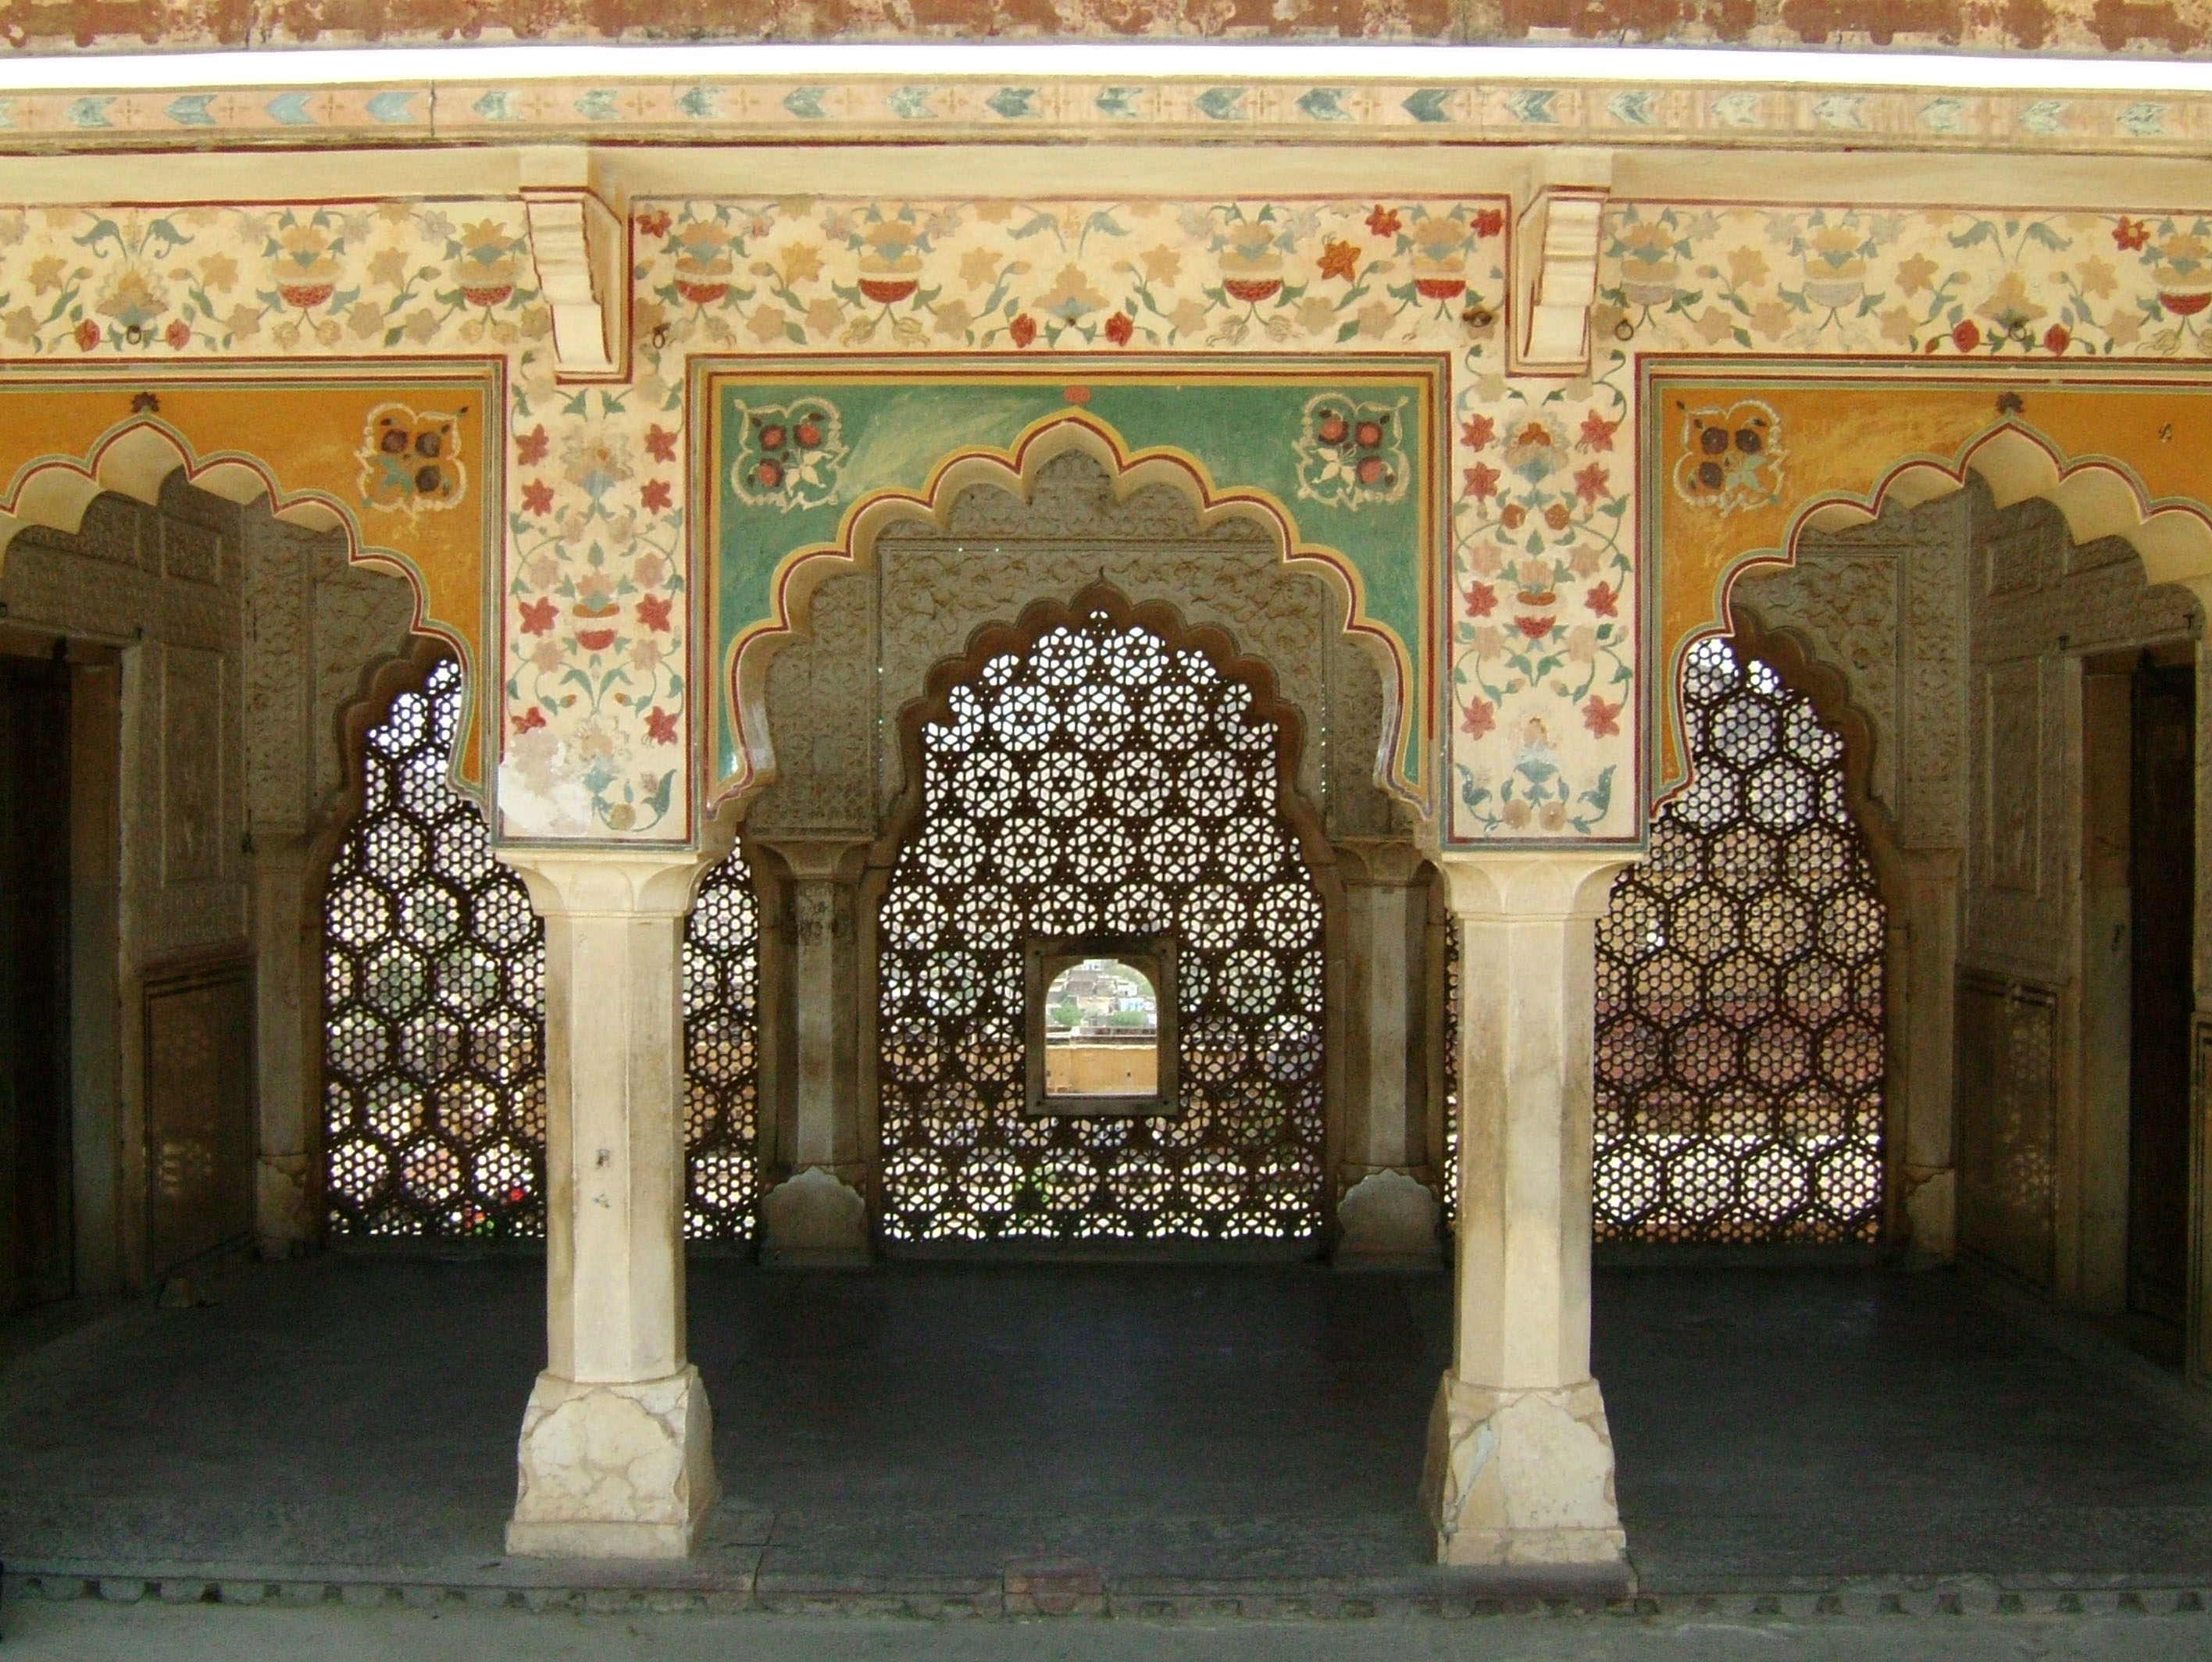 Rajasthan Jaipur Amber Fort compound architecture India Apr 2004 03